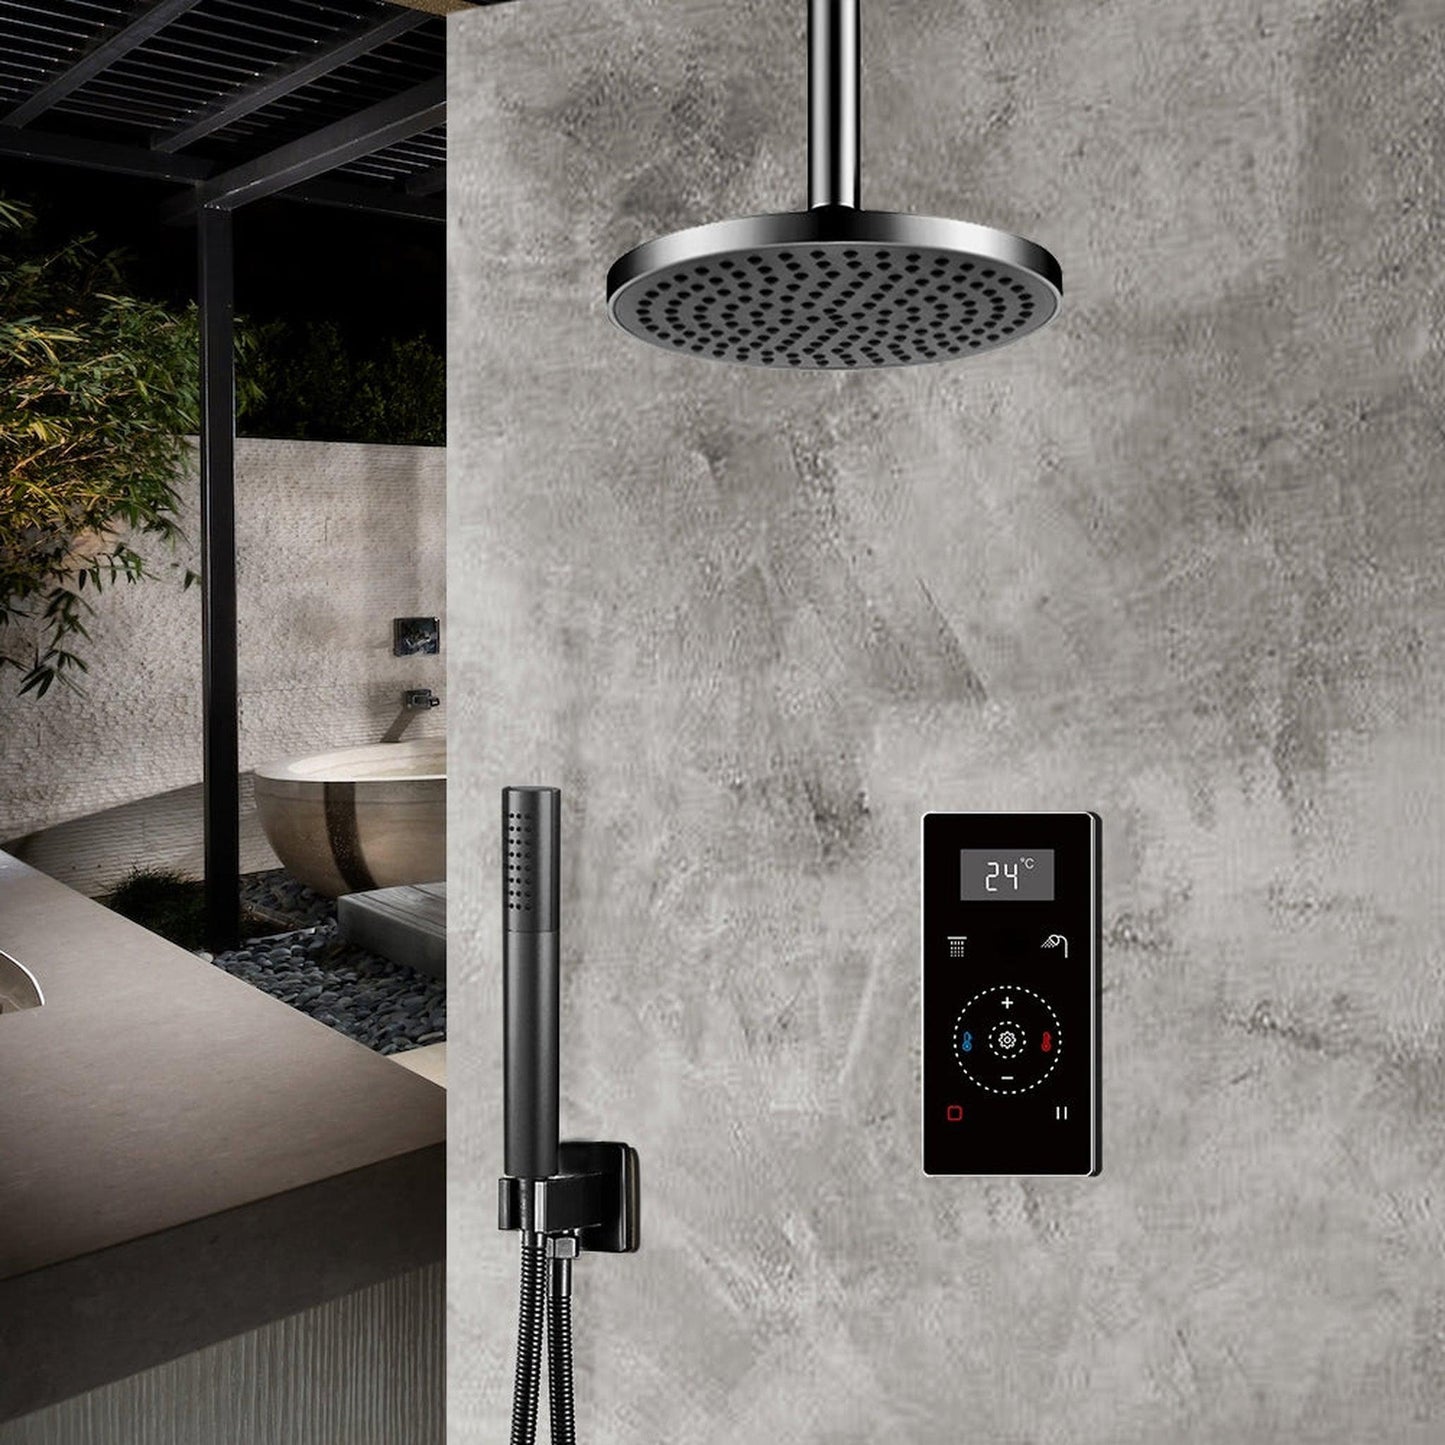 Fontana 12" Matte Black Ceiling Mounted Digital Thermostatic Shower With Black Digital Touch Screen Shower Mixer Display Rainfall Shower Set With Hand Shower